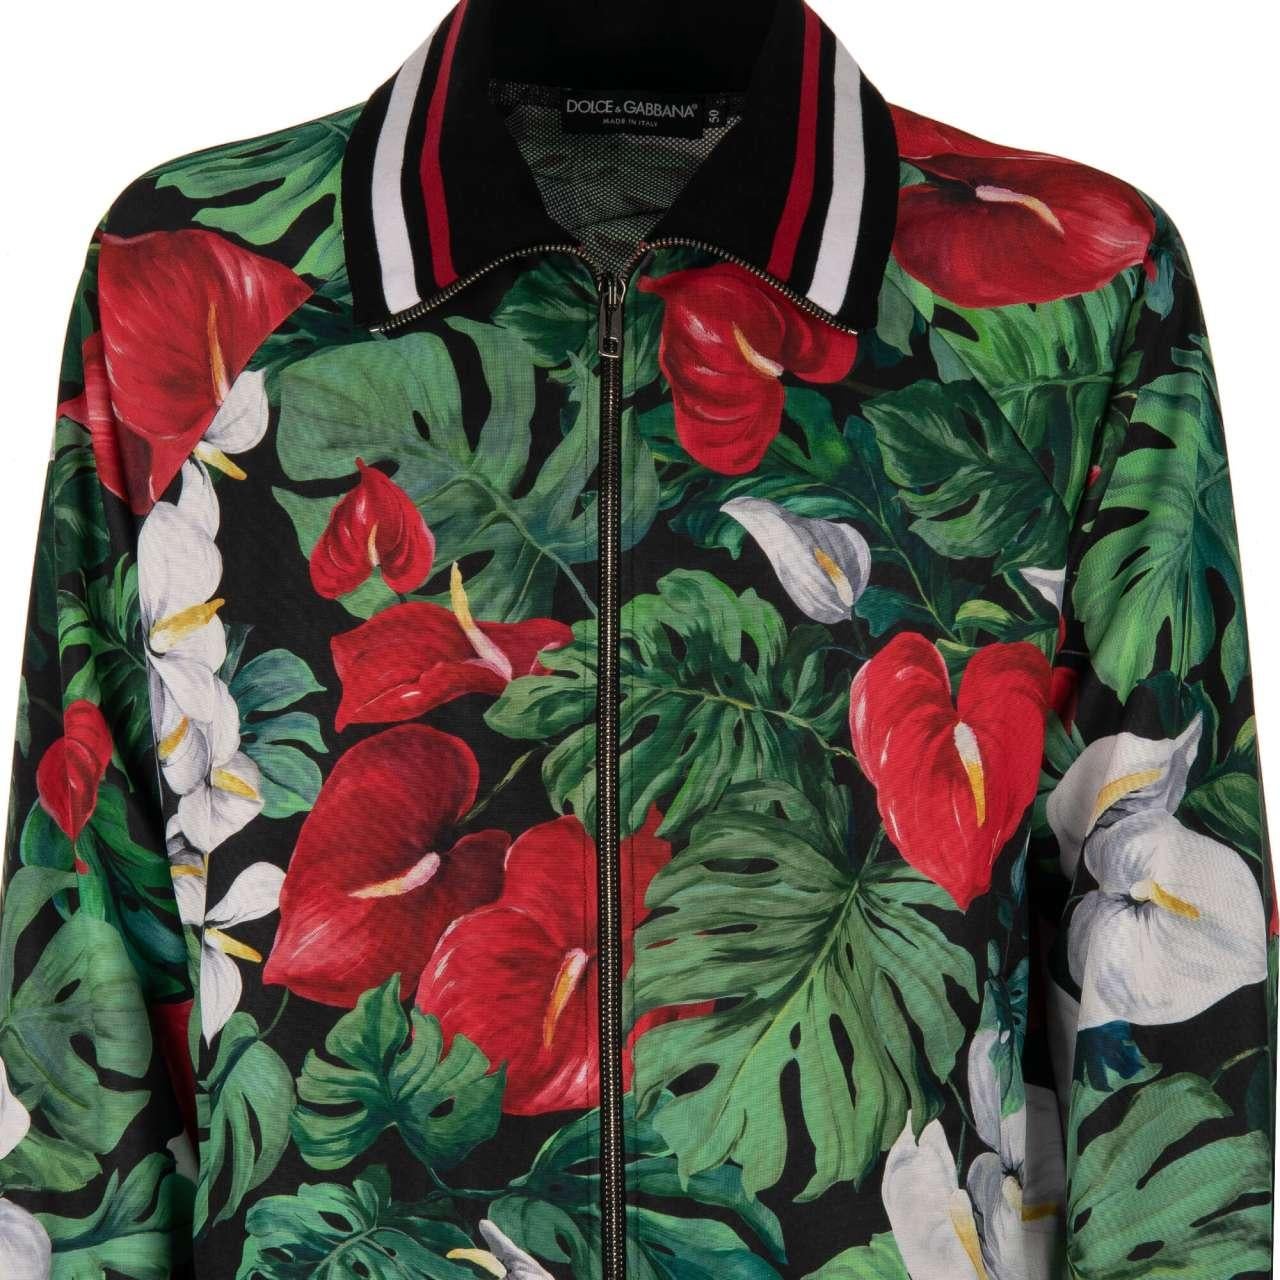 - Floral printed track jacket with knitted details, zip pockets and zip closure by DOLCE & GABBANA - Former RRP: EUR 775 - New with tag - Wide fit - MADE IN ITALY - Model: G90X8T-FS77L-HNGG8 - Material: 100% Polyester - Lining: 100% Polyester -